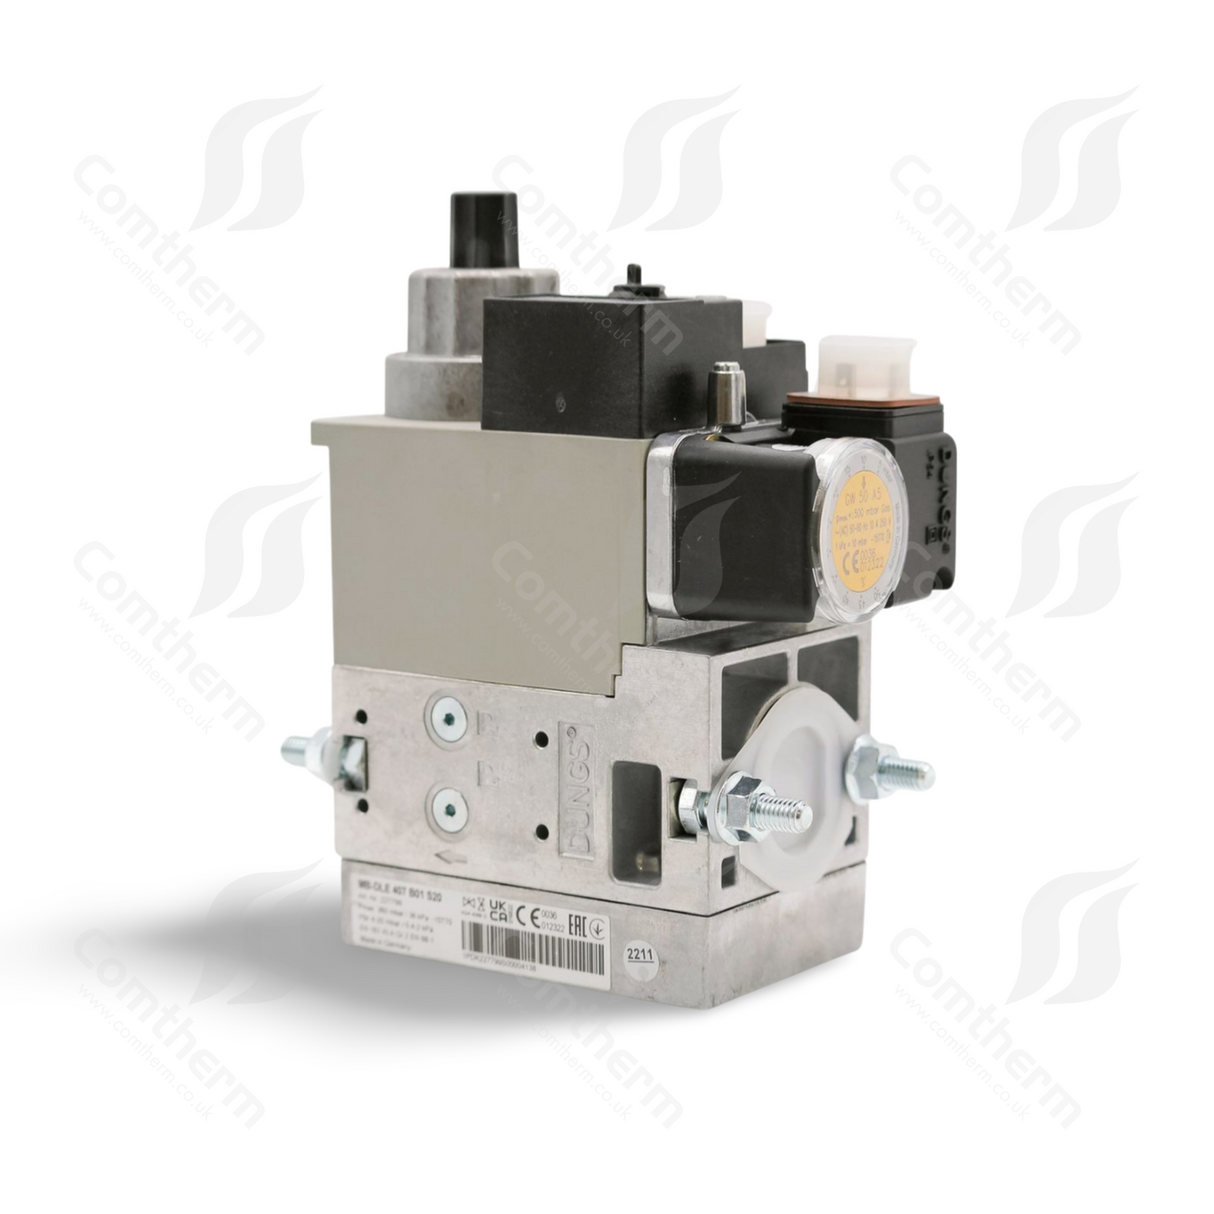 Dungs MB-DLE 407 B01 S20 + GW50A5 Multiblock-Gasventil – 110 V 